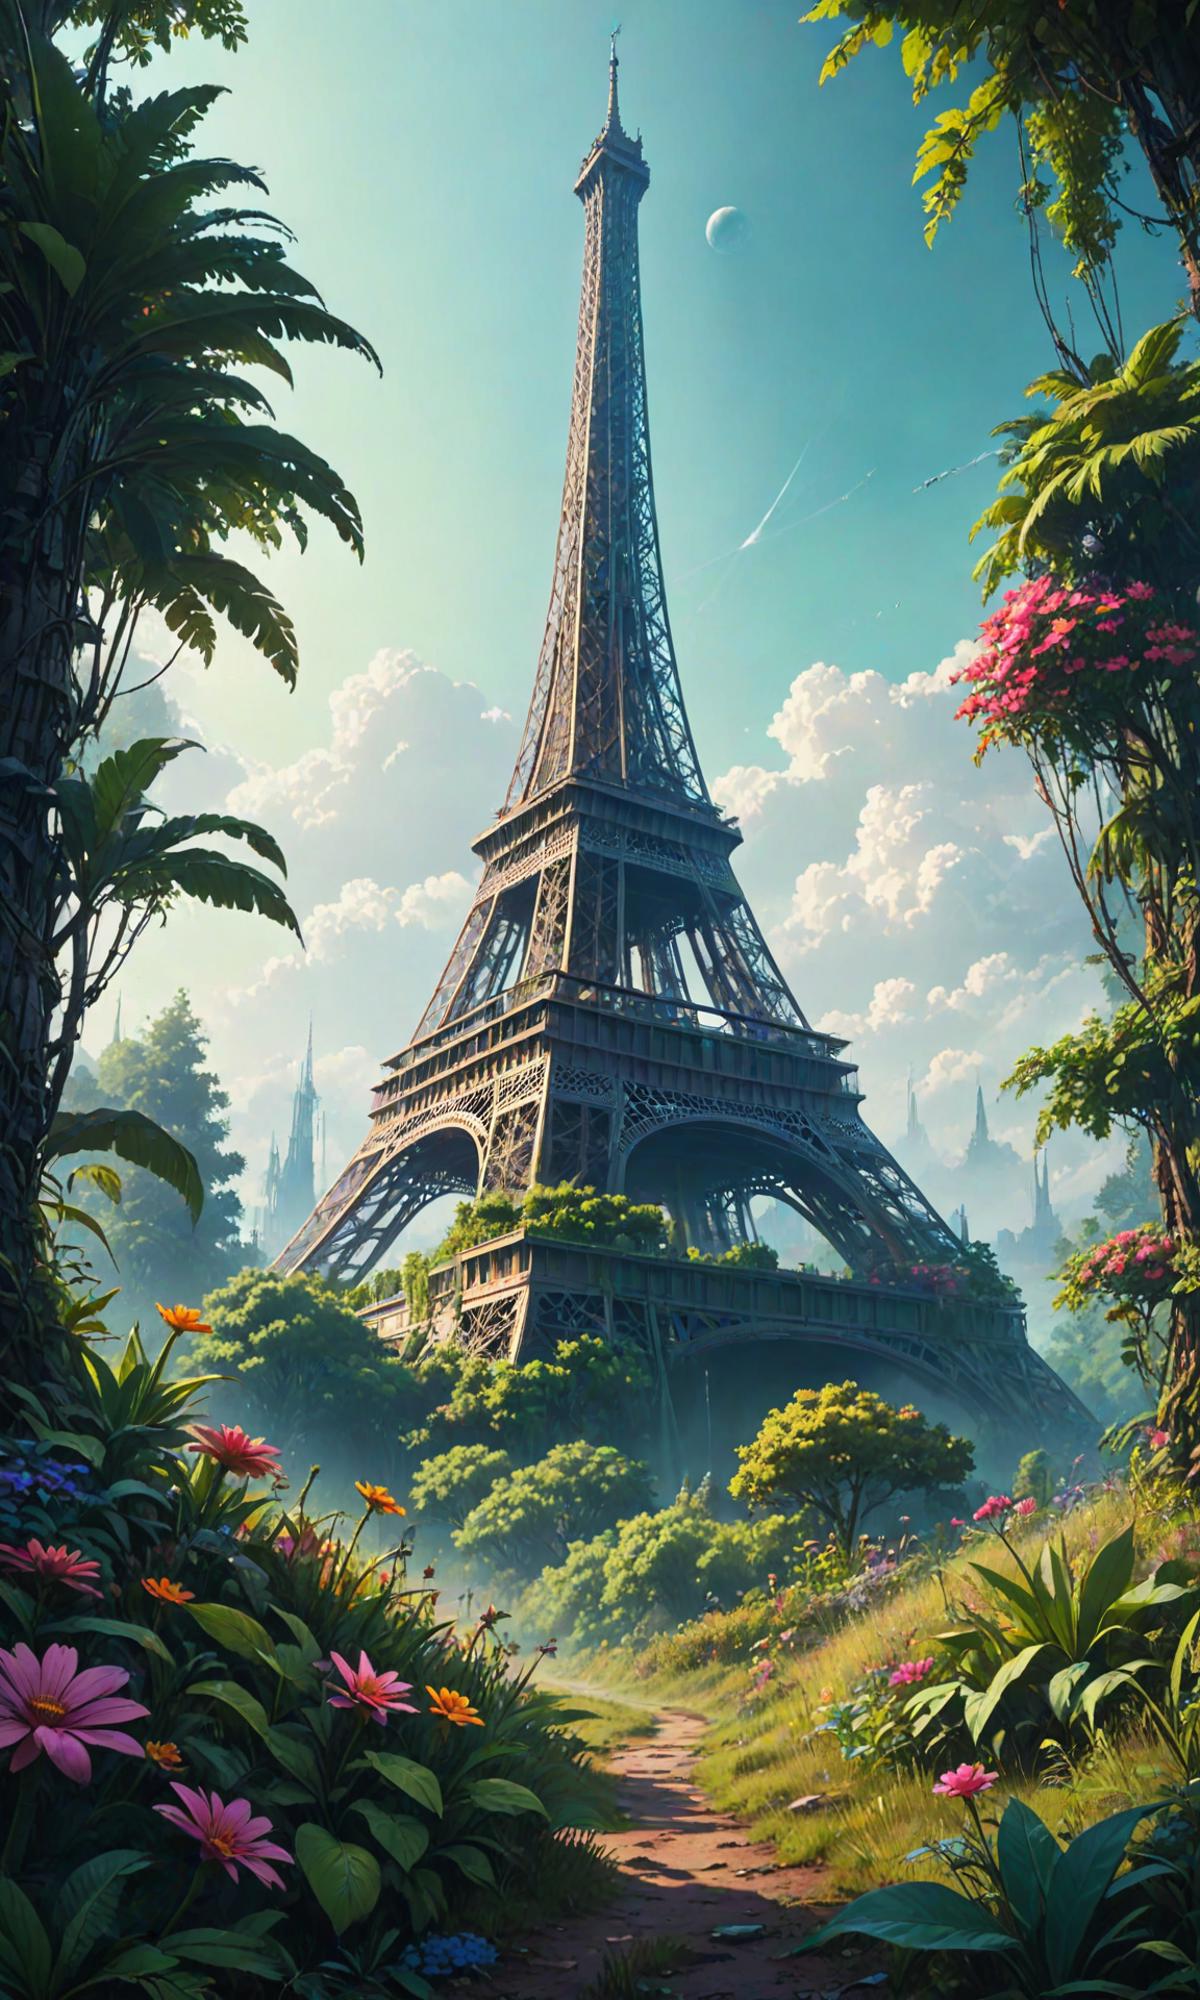 Eiffel Tower in Paris, France, surrounded by trees and flowers.